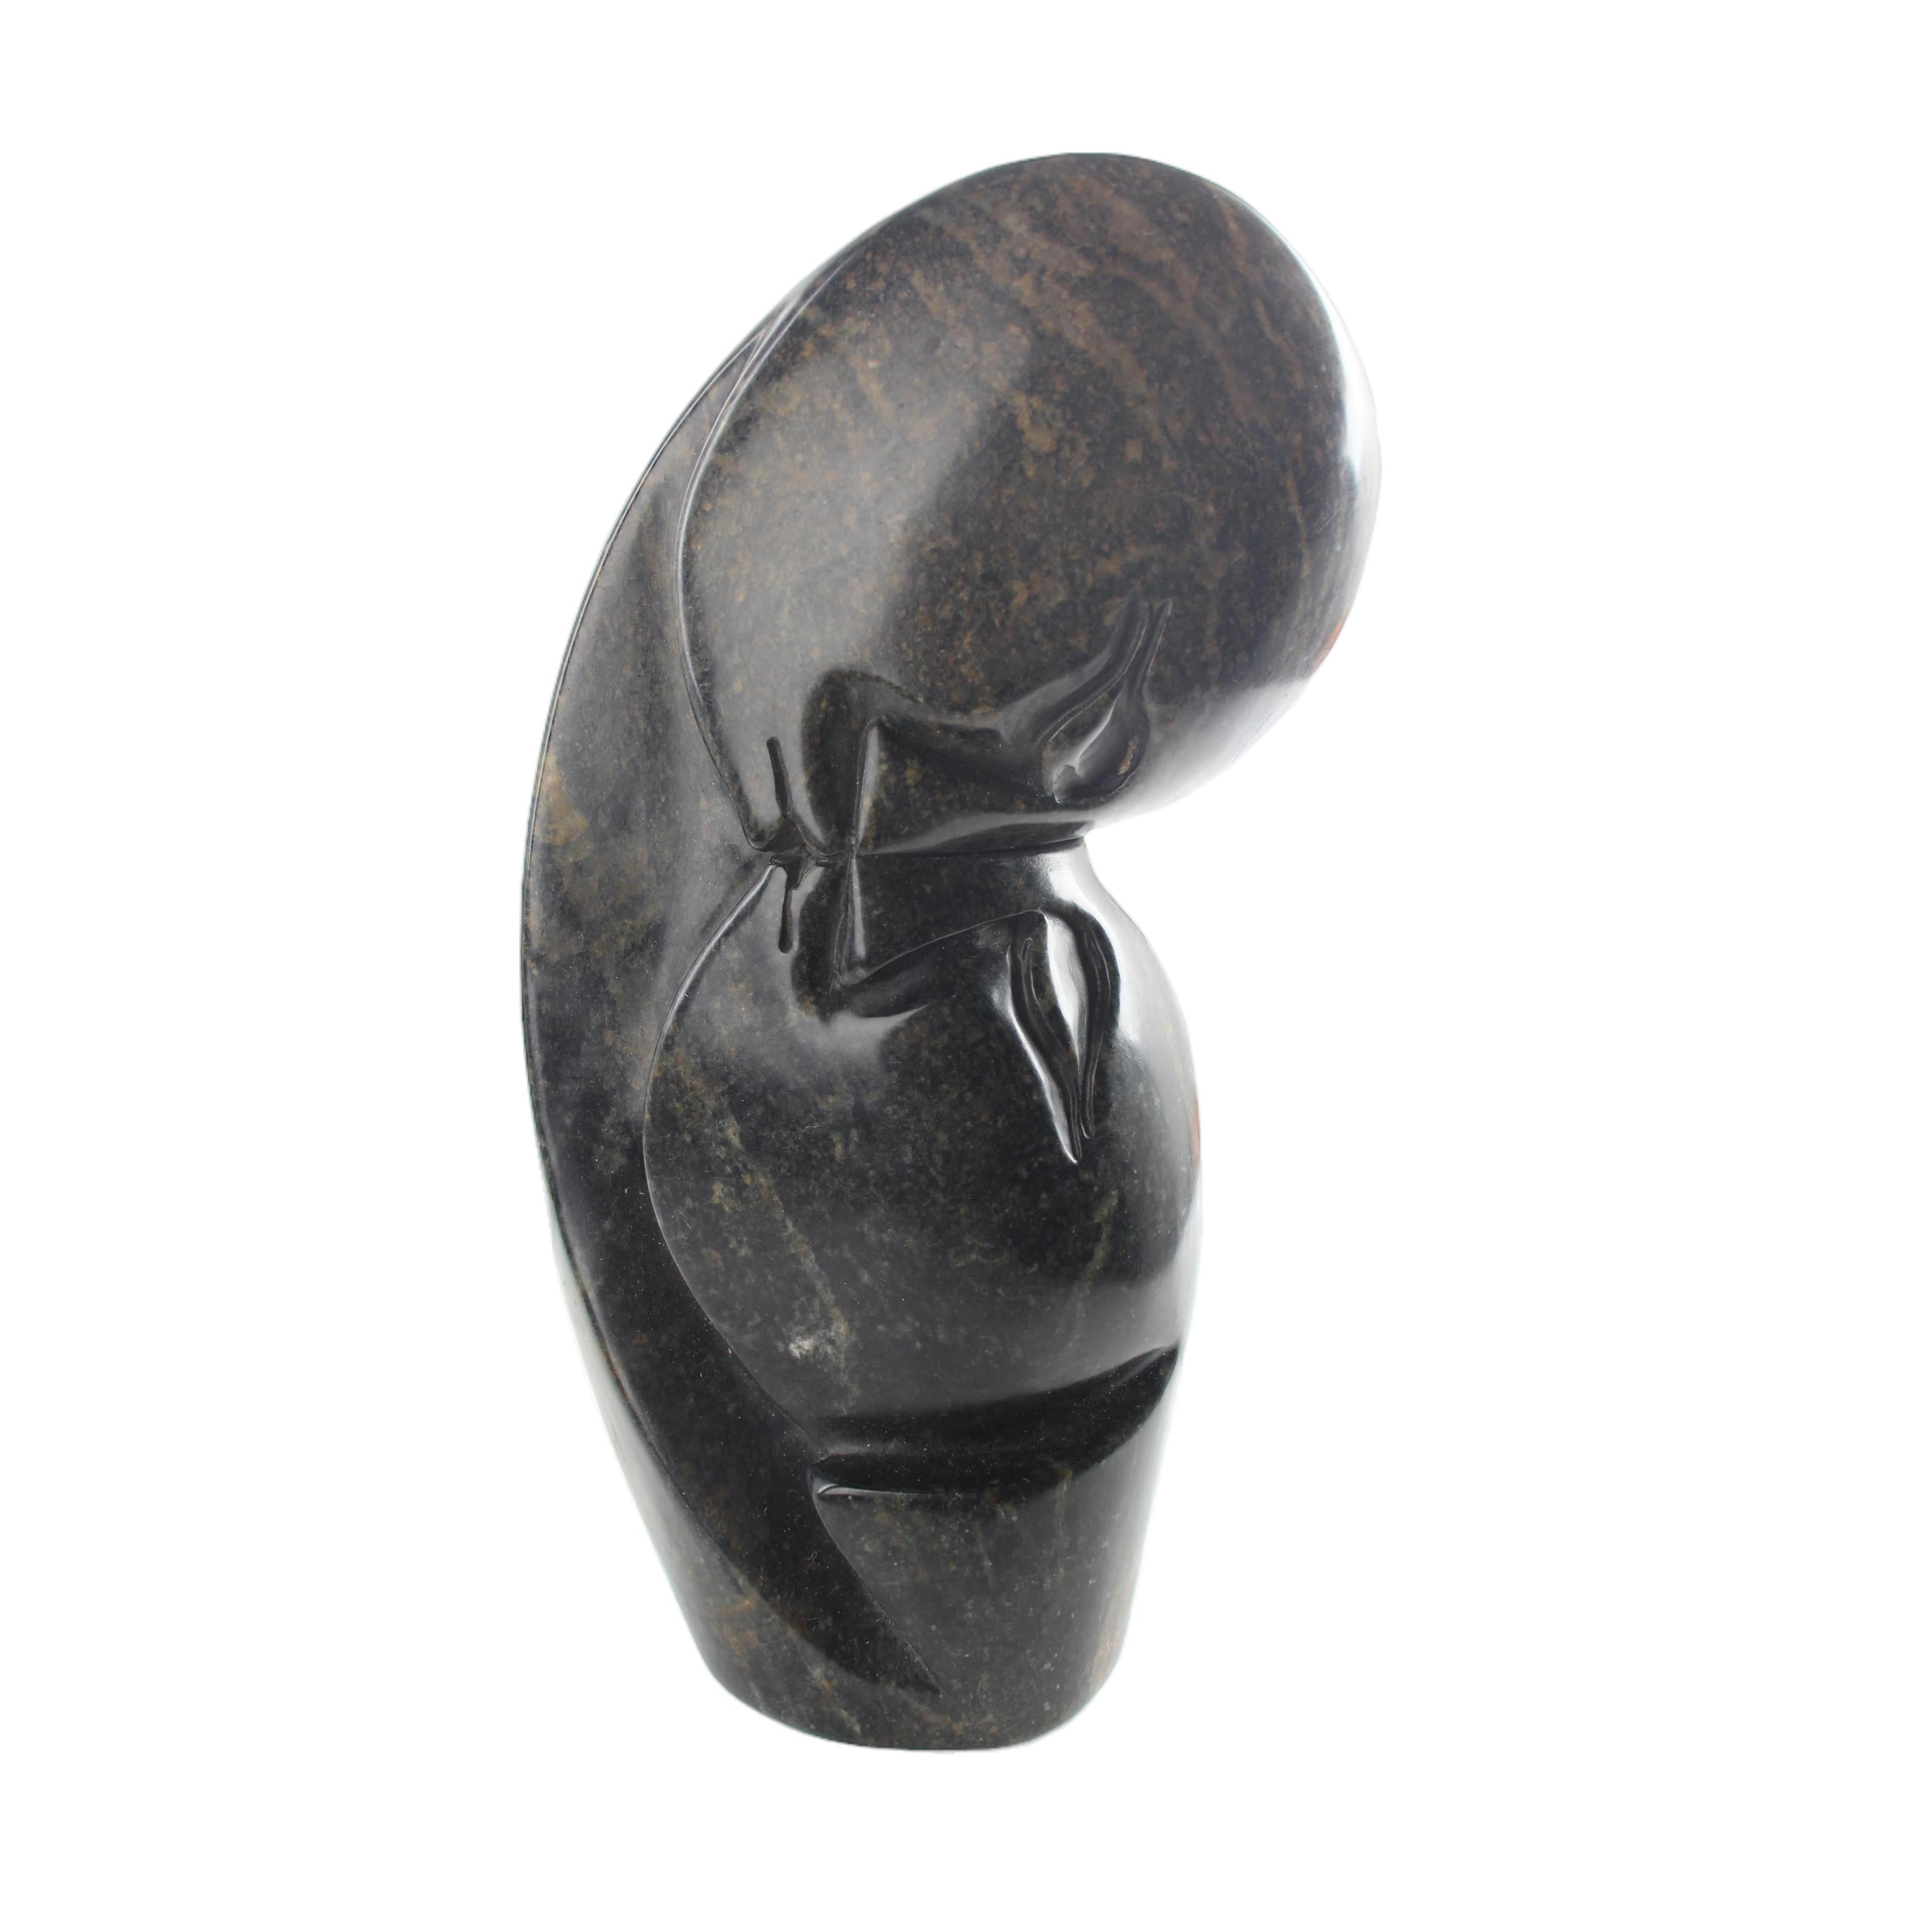 Shona Tribe Serpentine Stone Lovers ~12.2" Tall - Lovers